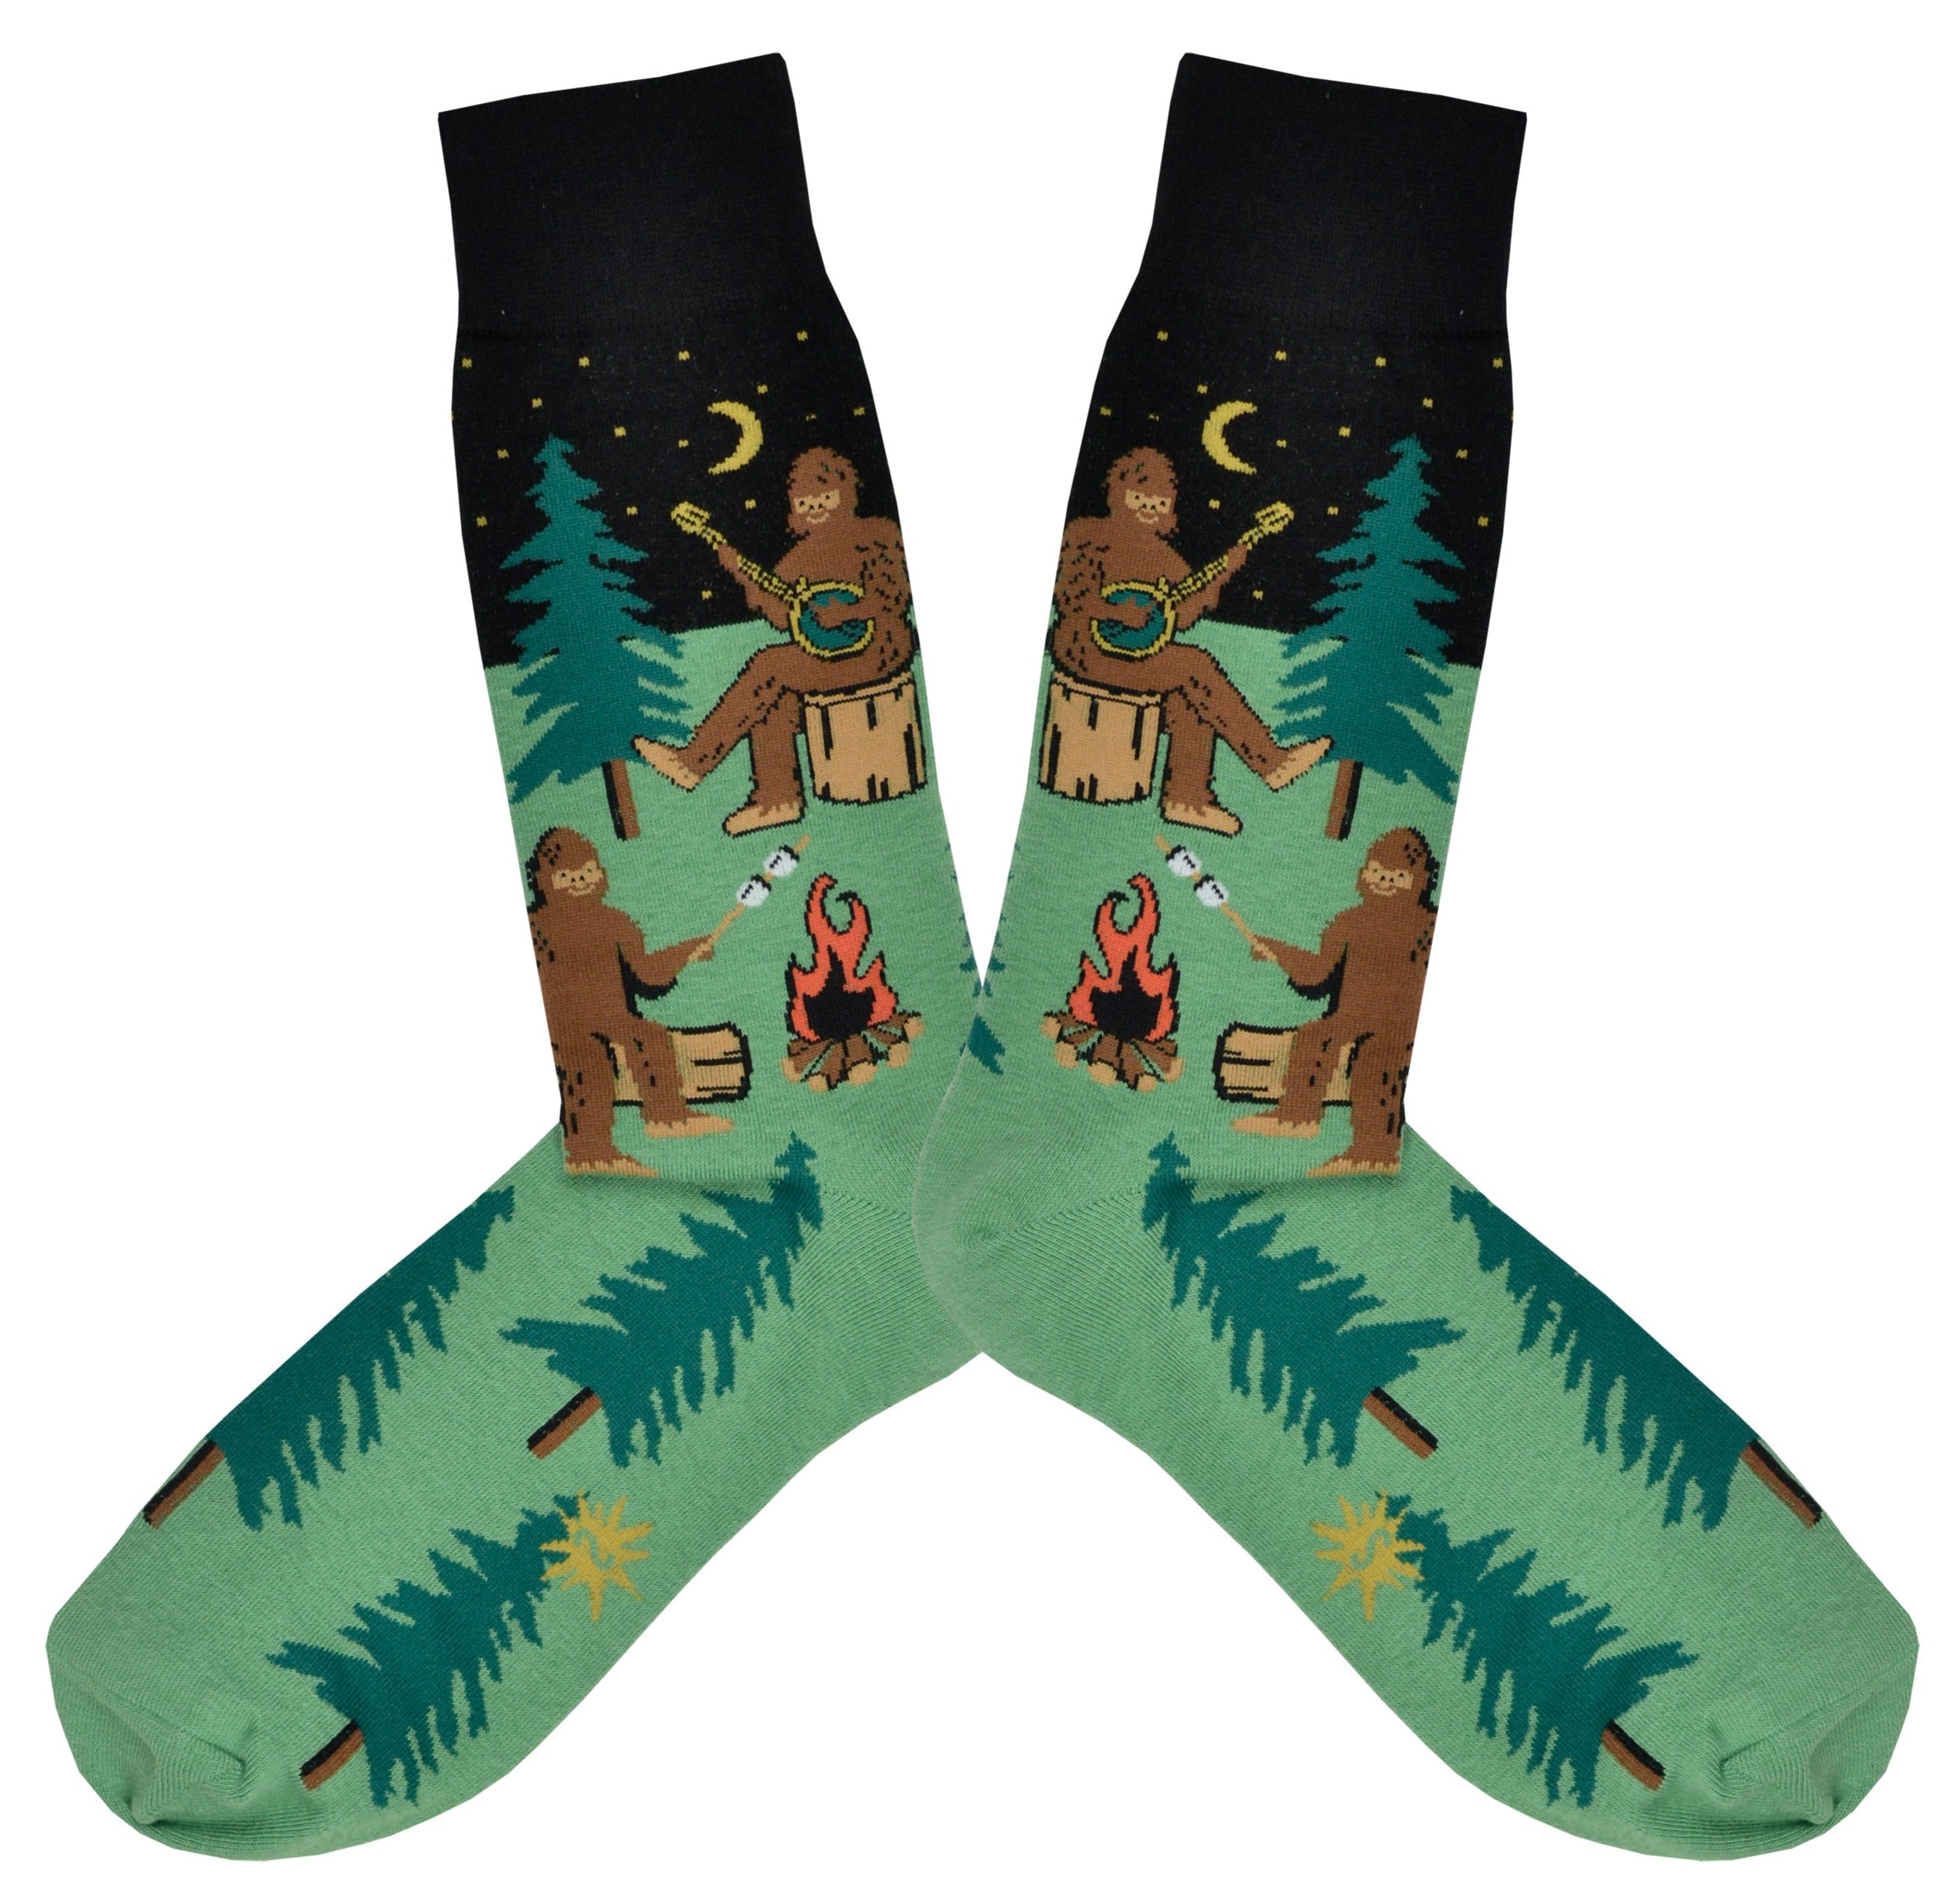 Shown in a flatlay, a pair of Sock It To Me green cotton men's crew socks with black starry sky and various sasquatches enjoying a campfire (playing banjo, roasting marshmallows) among a pine forest